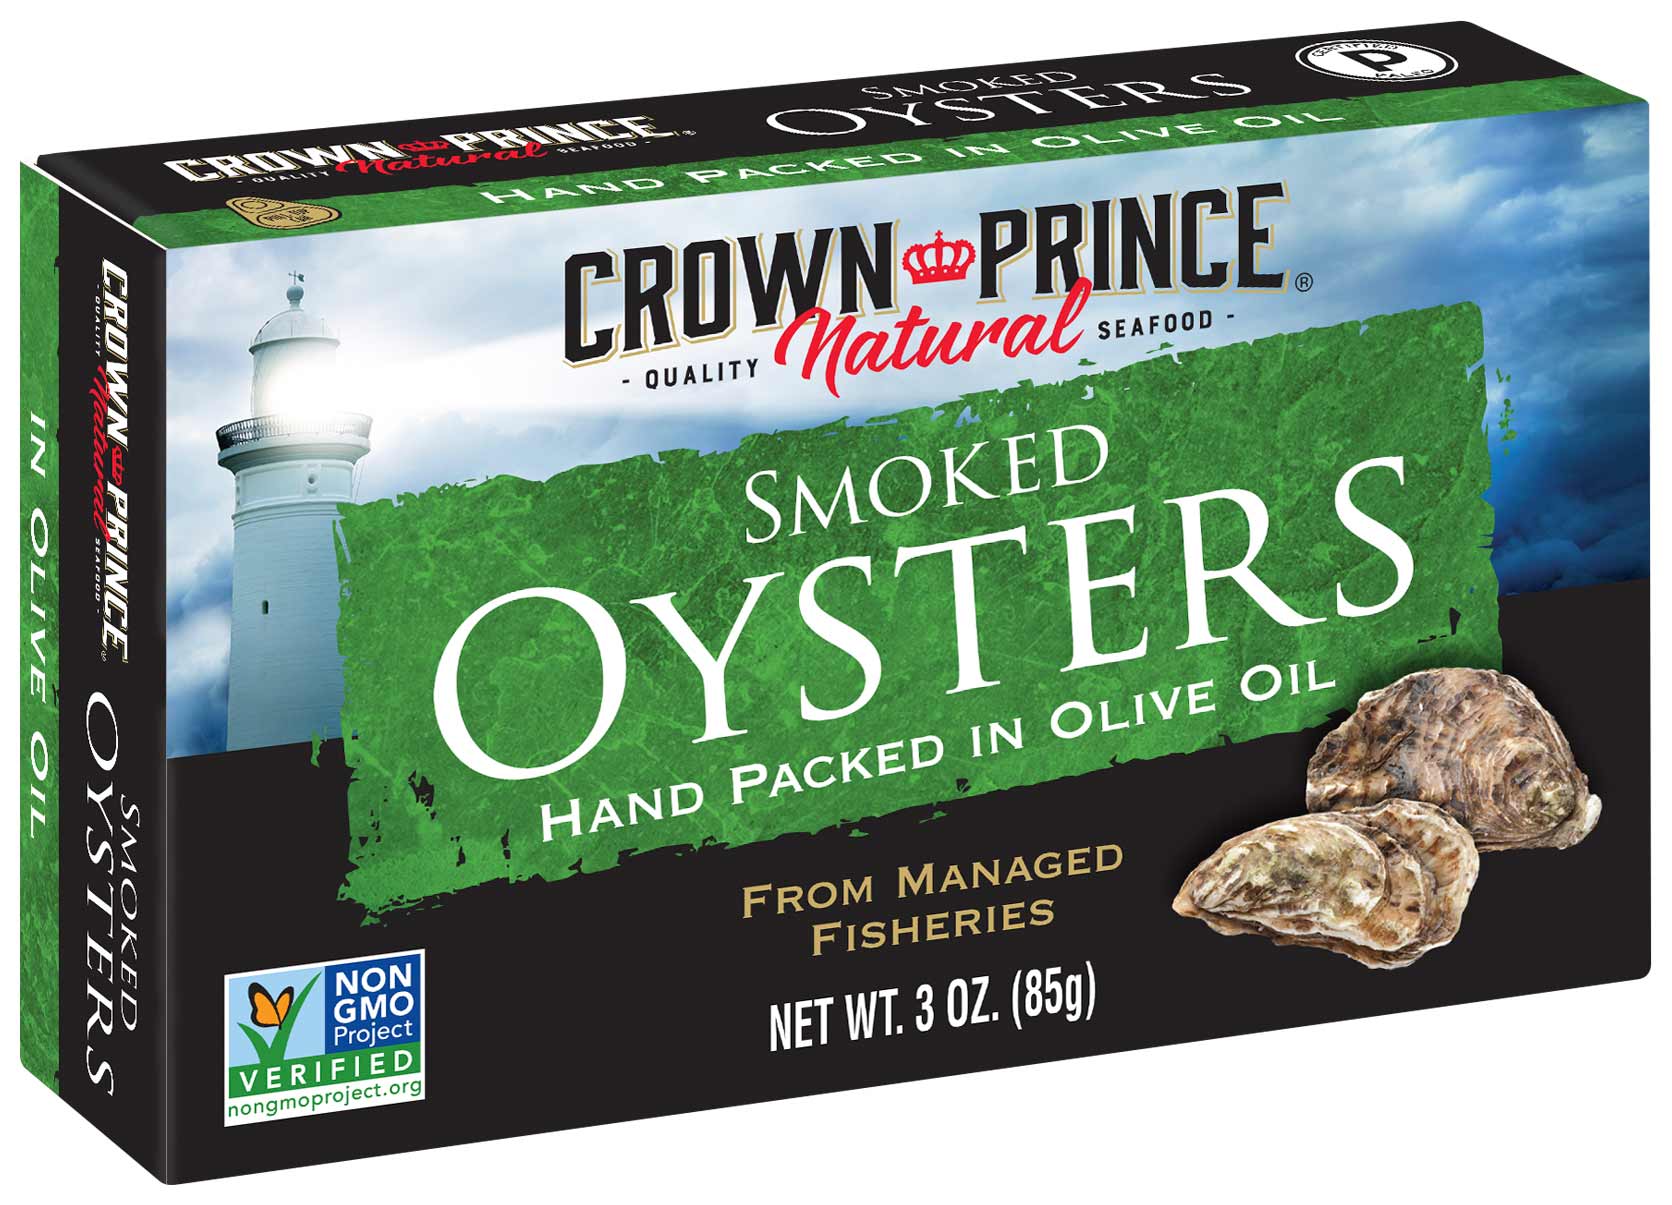 Crown Prince Natural Smoked Oysters in Olive Oil